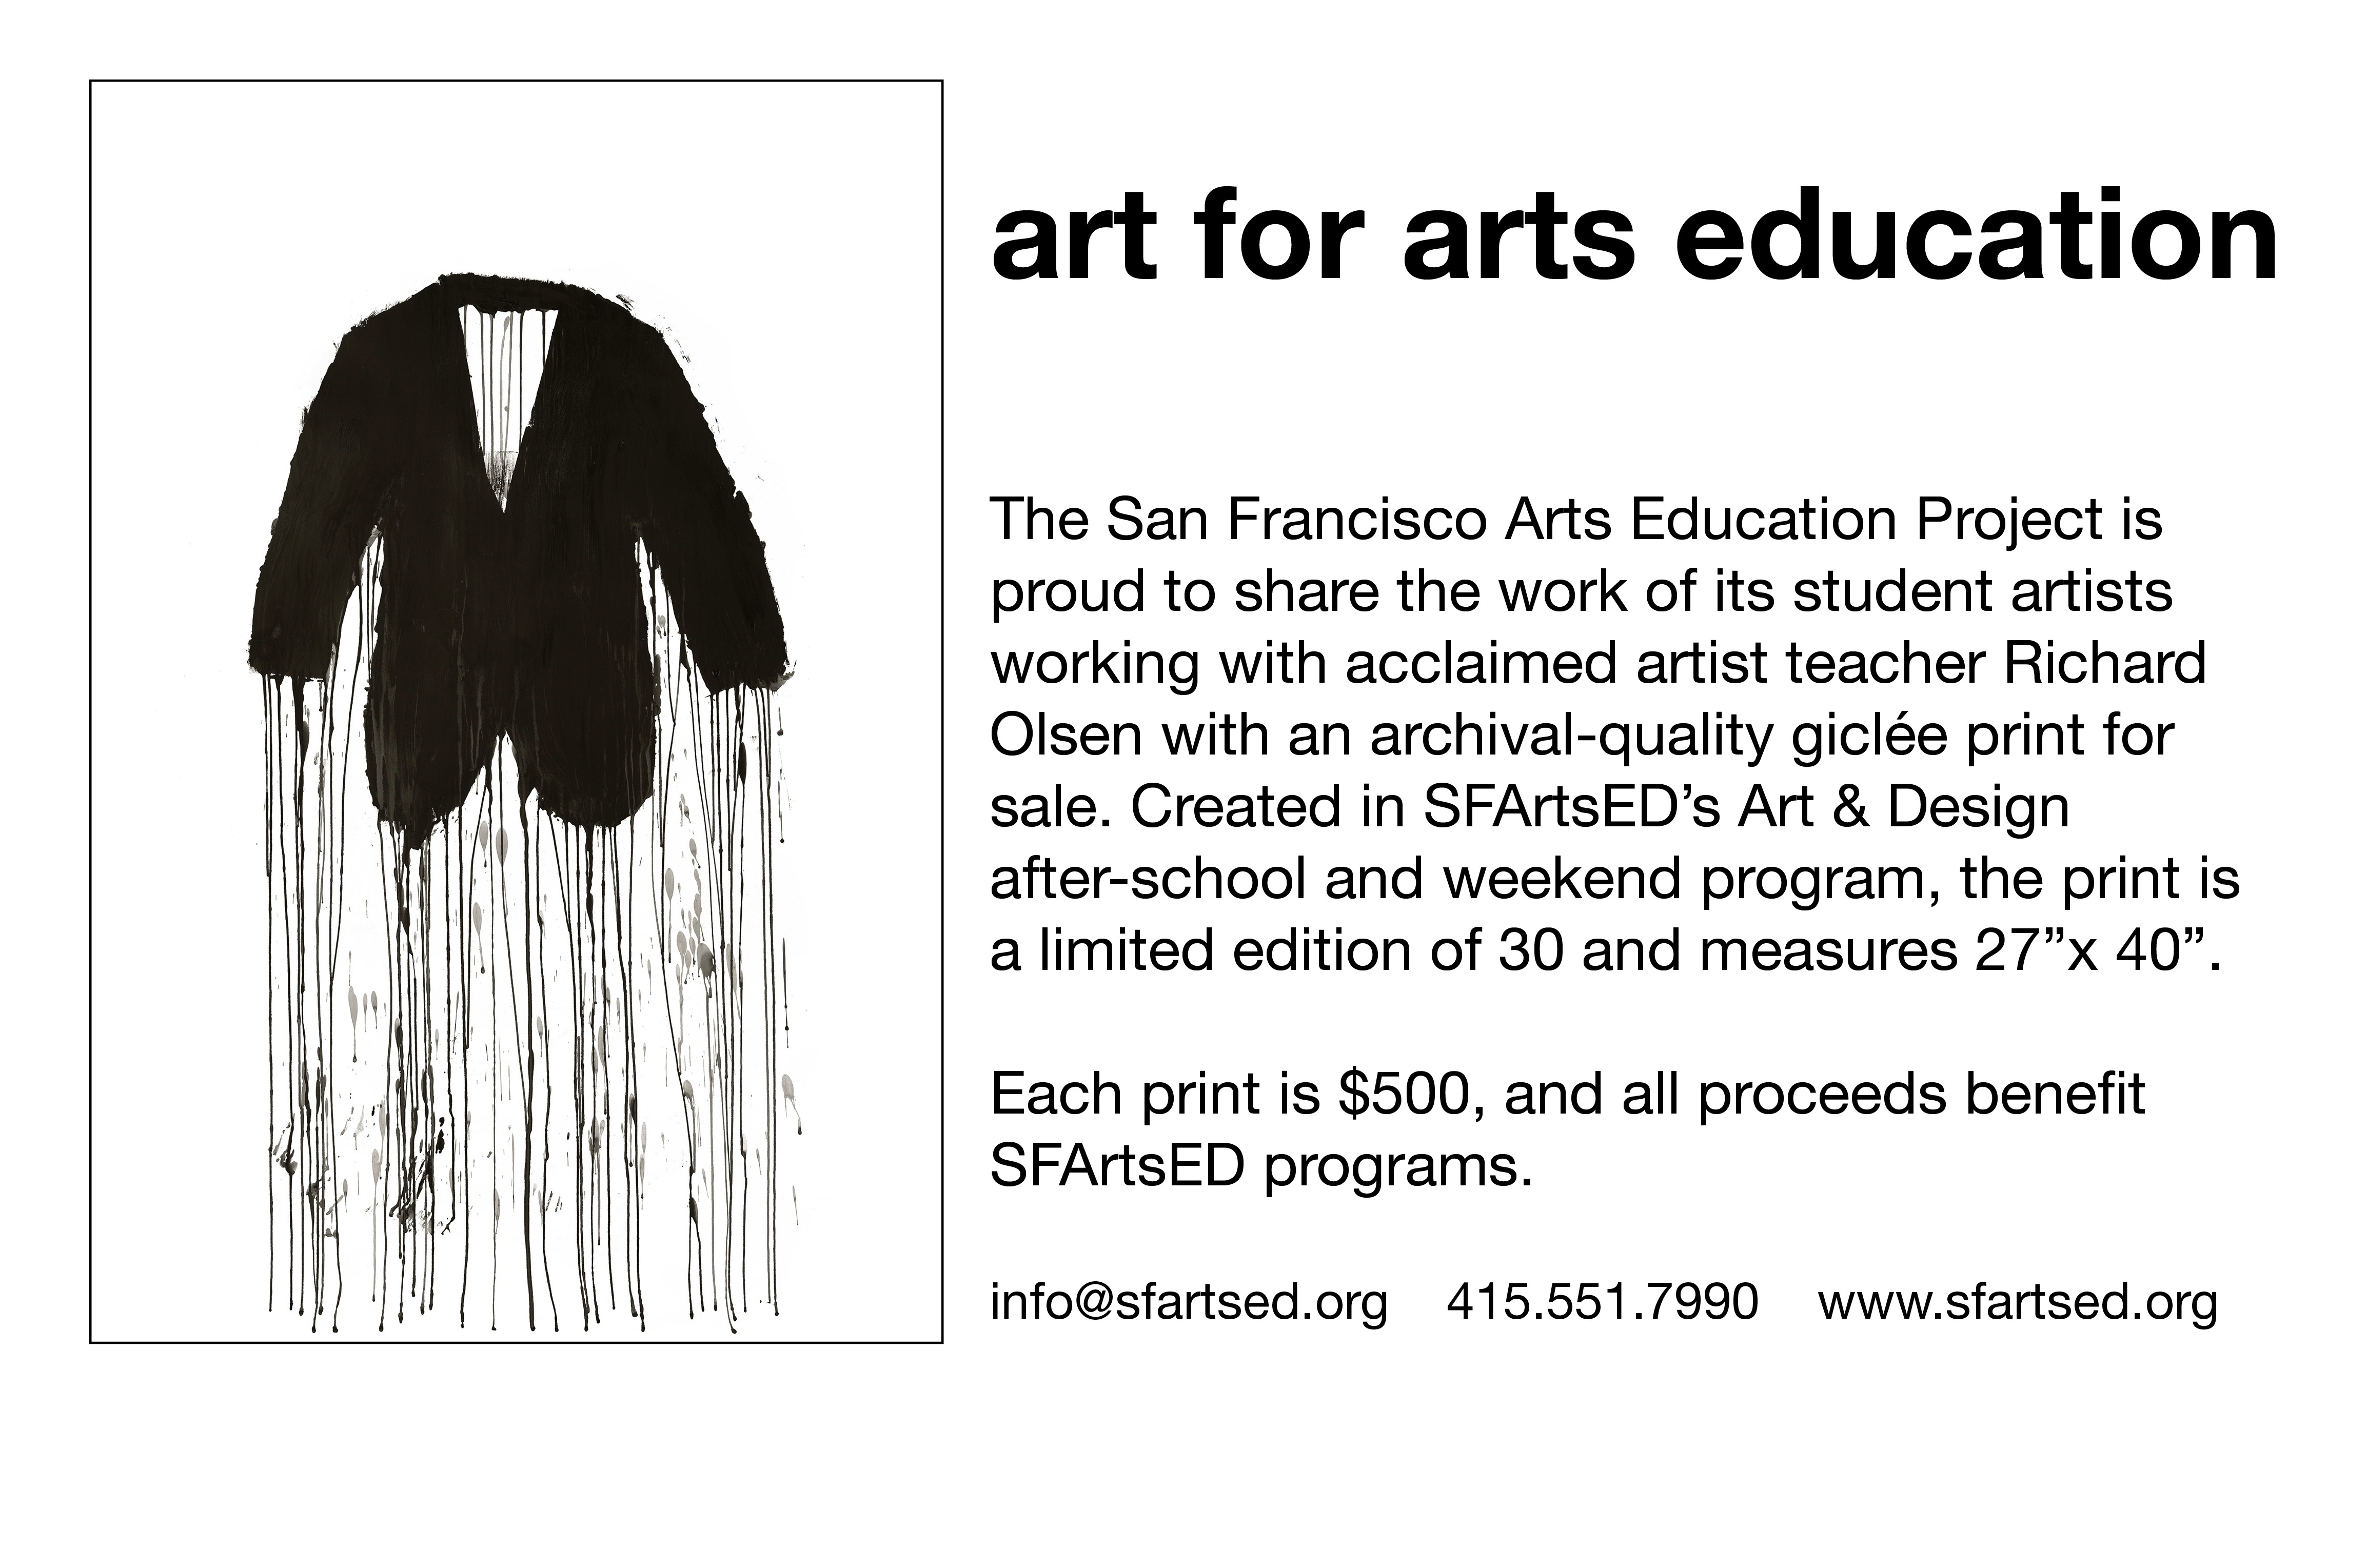 Art for arts education: a limited edition giclée print